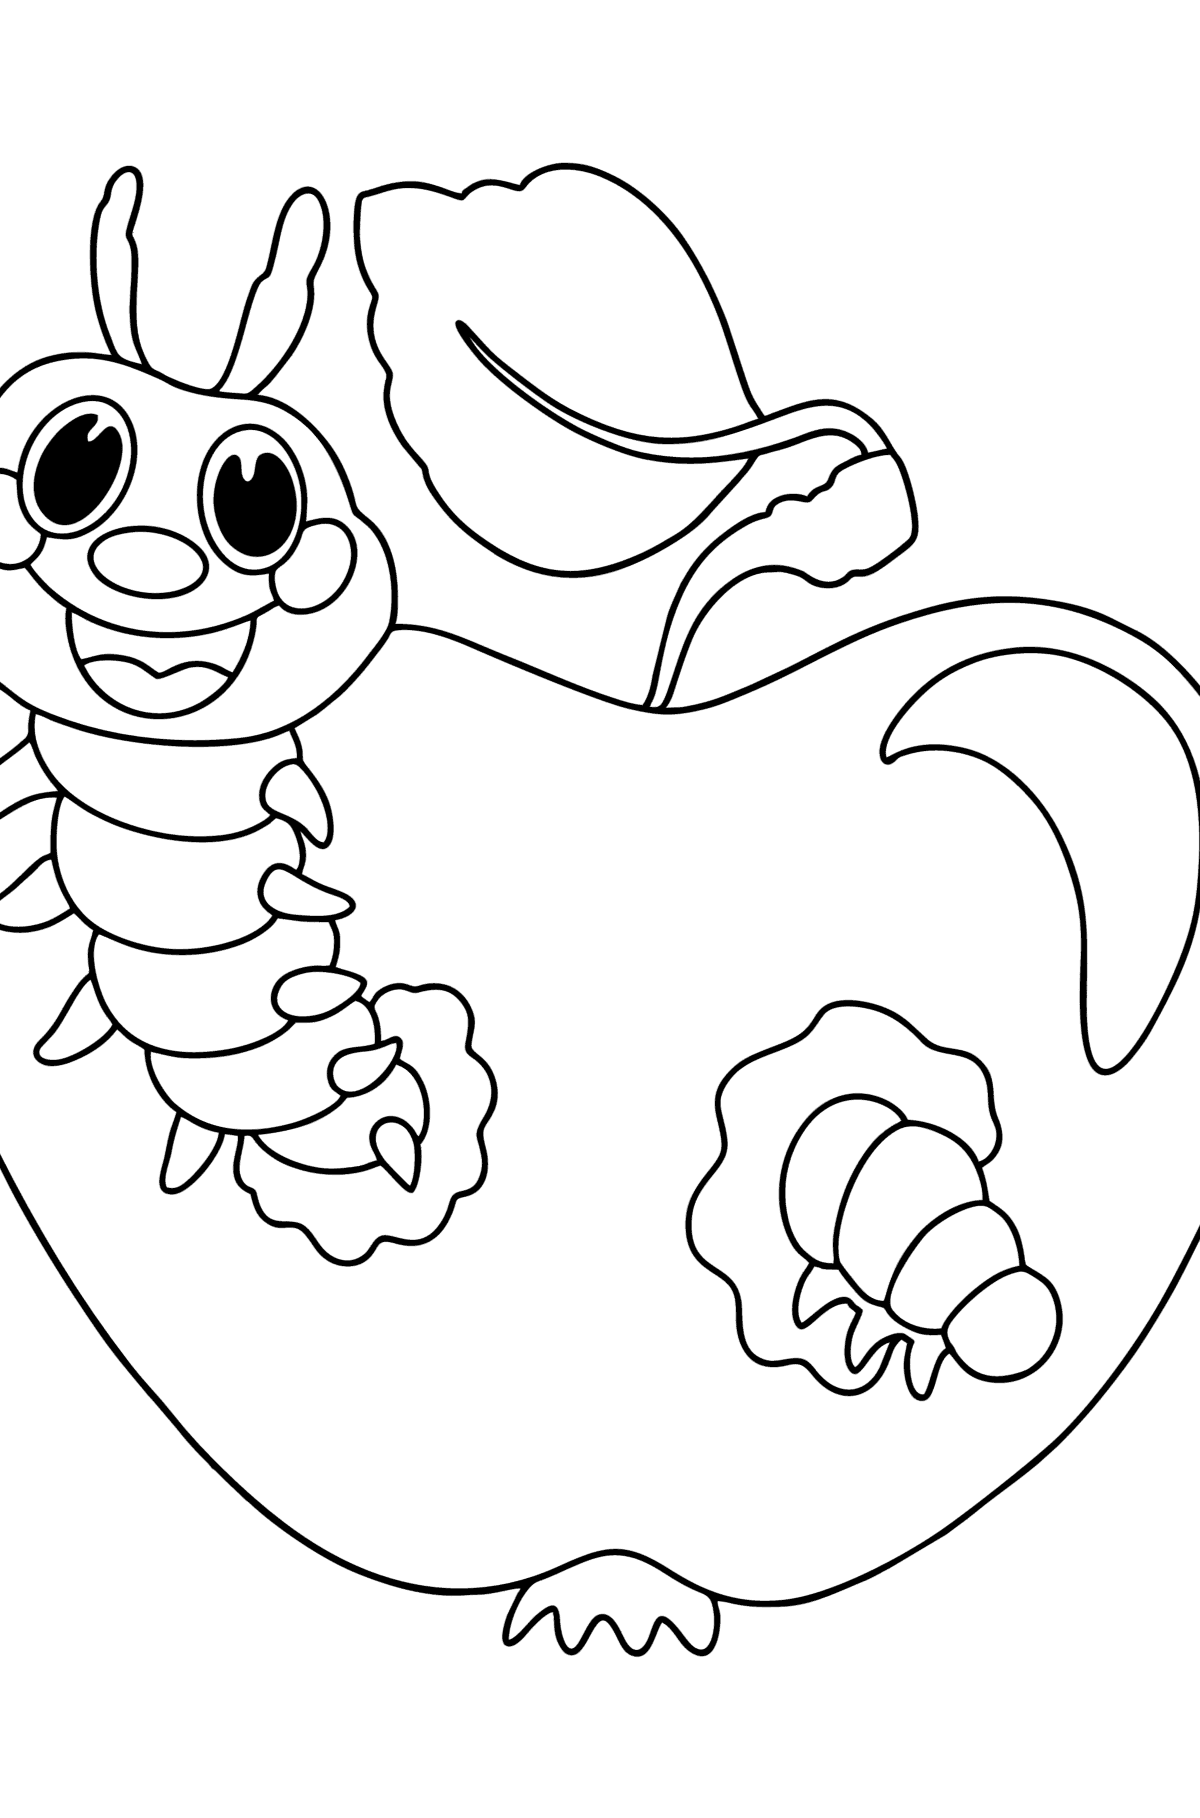 Good caterpillar сoloring page - Coloring Pages for Kids